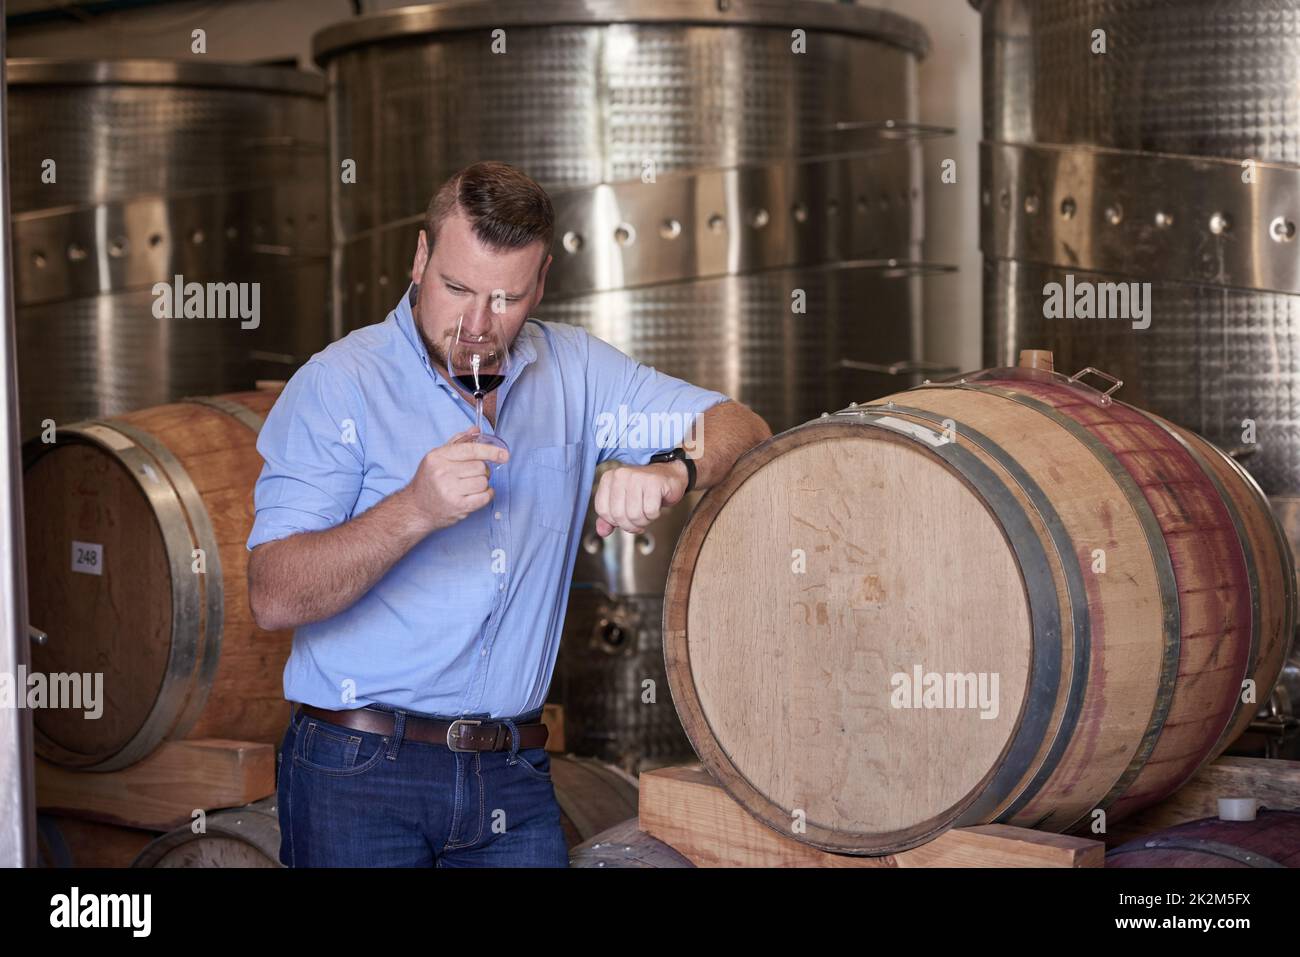 Wine speaks to all the senses. Cropped shot of a man enjoying wine tasting in his distillery. Stock Photo